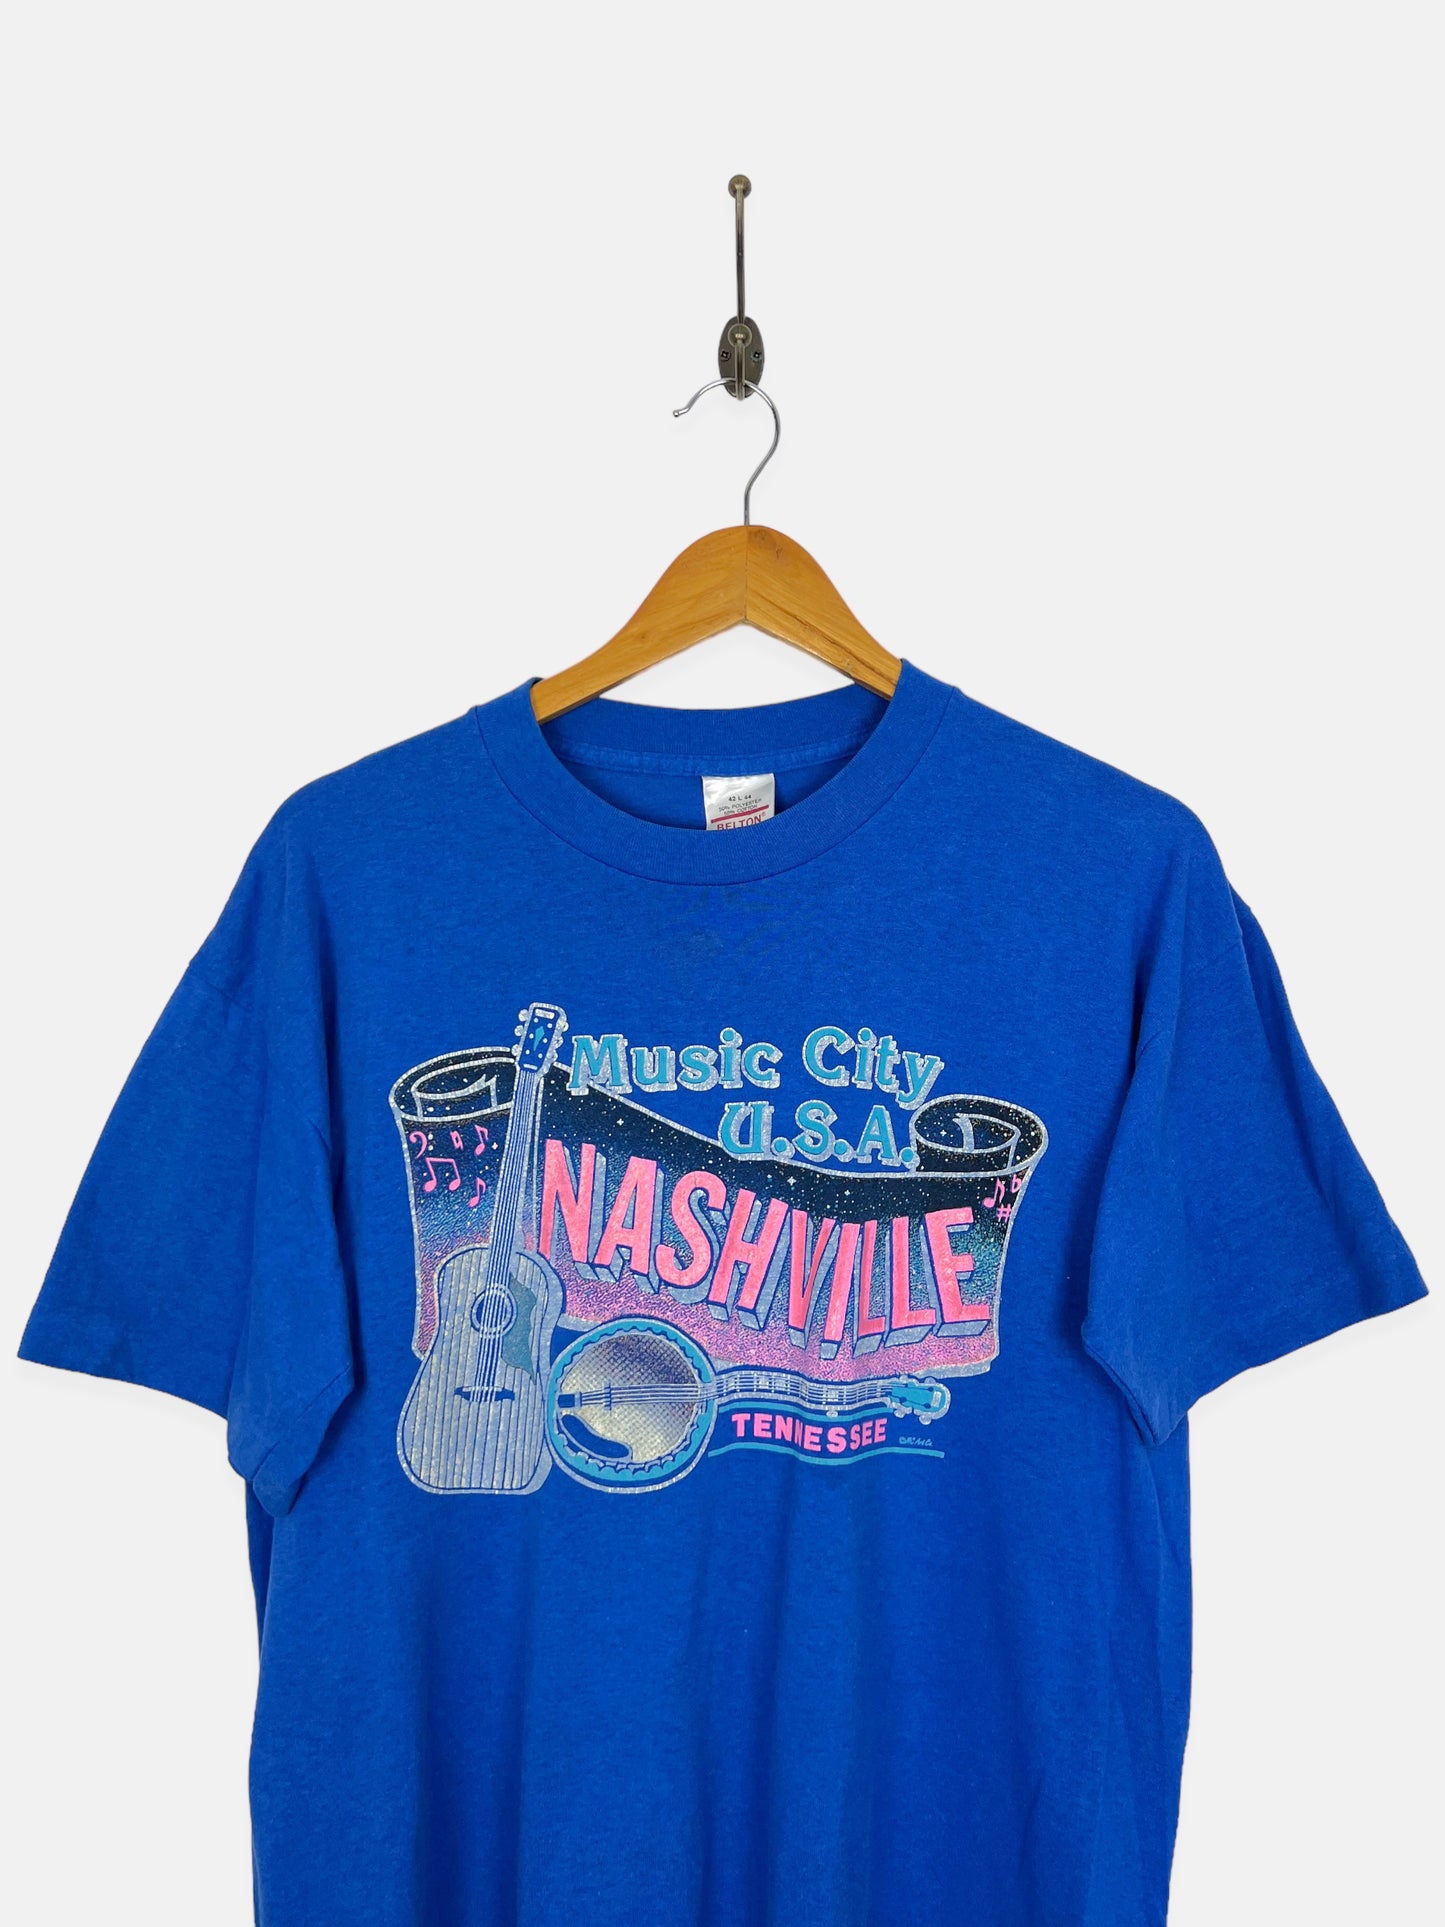 90's Music City Tennessee USA Made Vintage T-Shirt Size 12-14